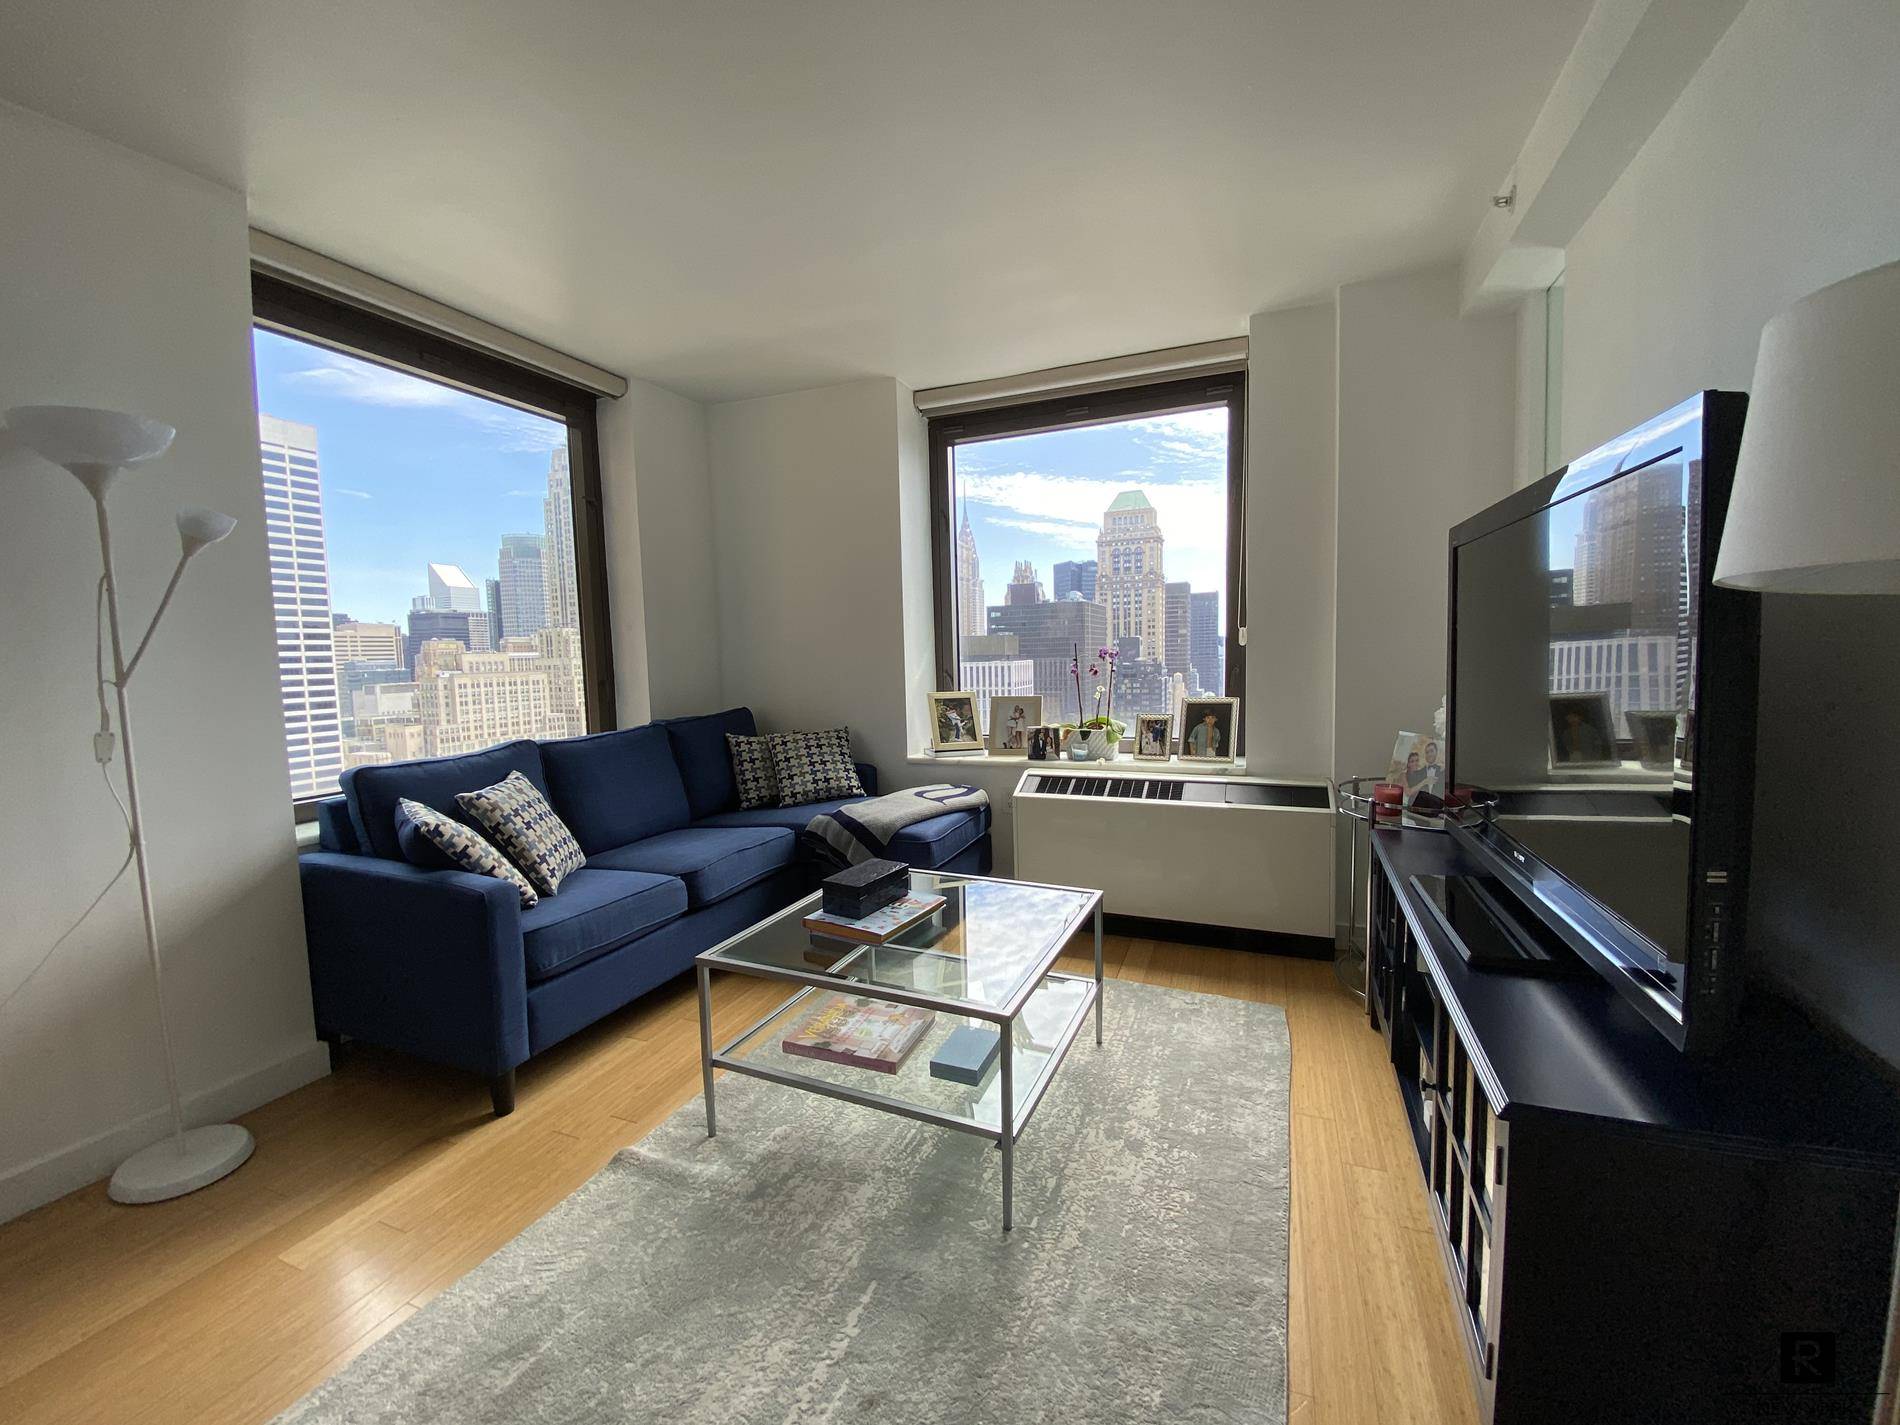 LUXURY SPACIOUS 1 BEDROOM CONDO WITH UNOBSTRUCTED CITY AND PARK VIEWS TO THE NORTH AND EAST.